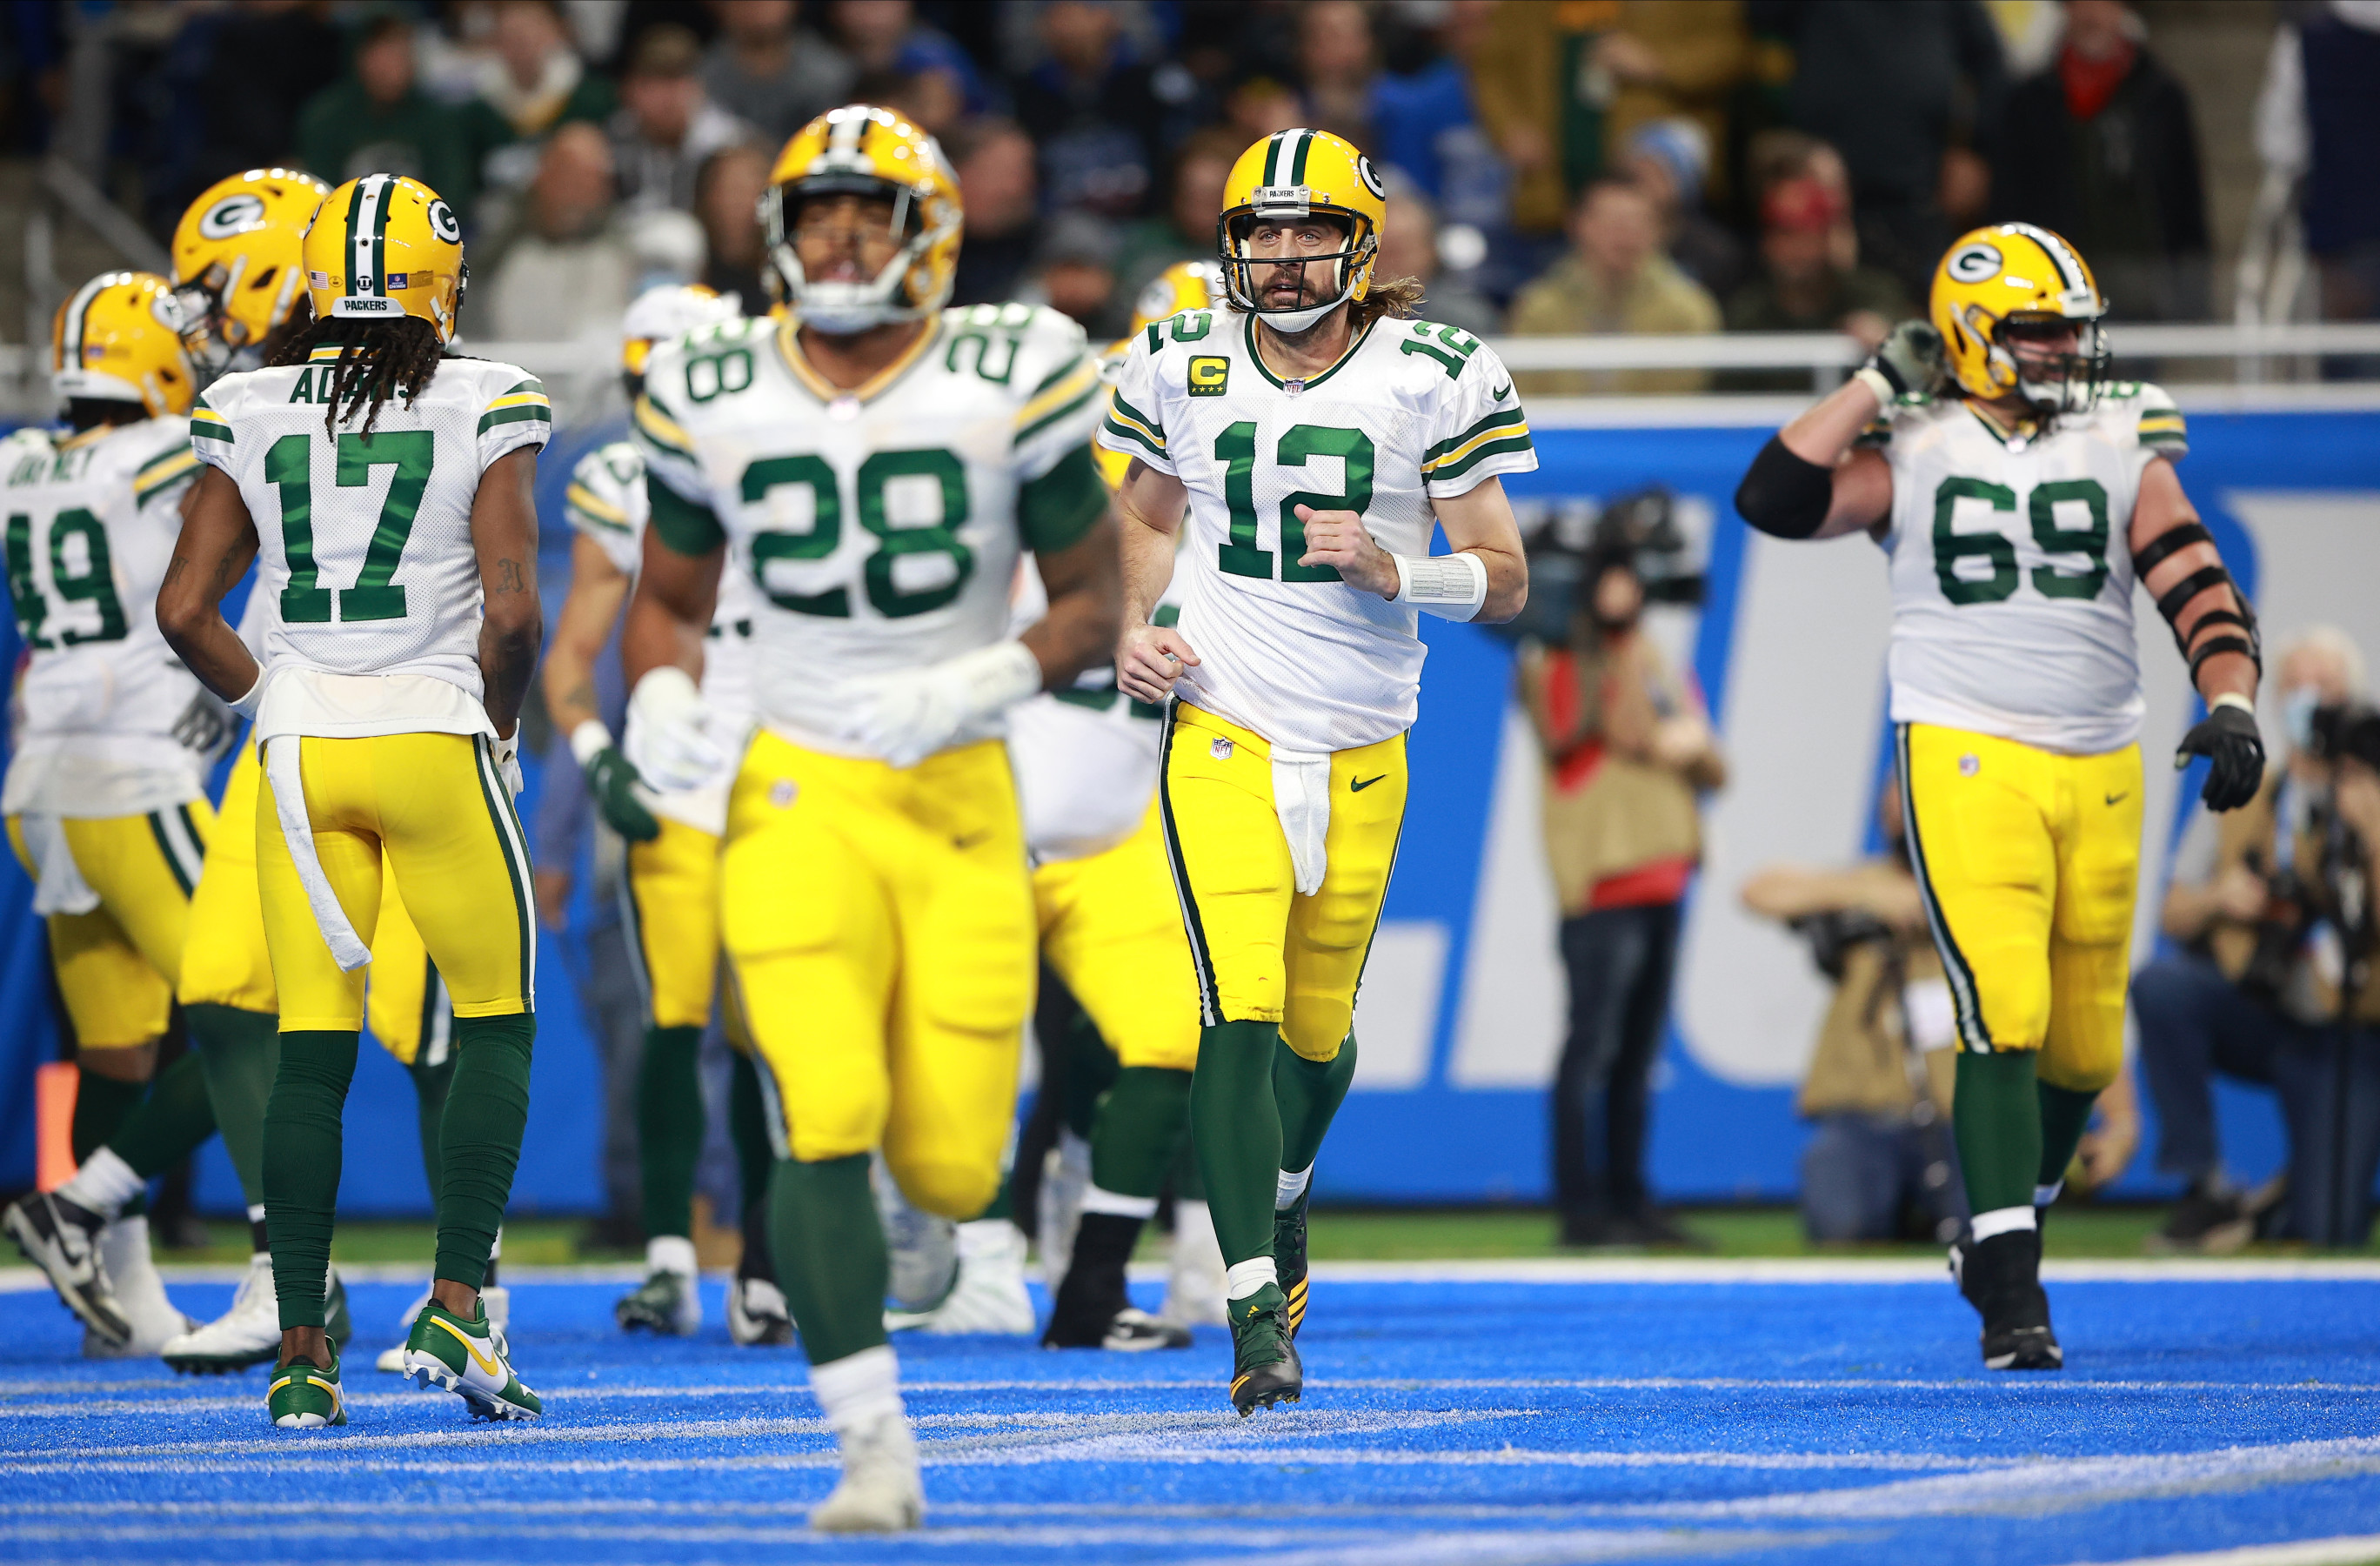 2022 Green Bay Packers Schedule: Full Dates, Times, and TV Info